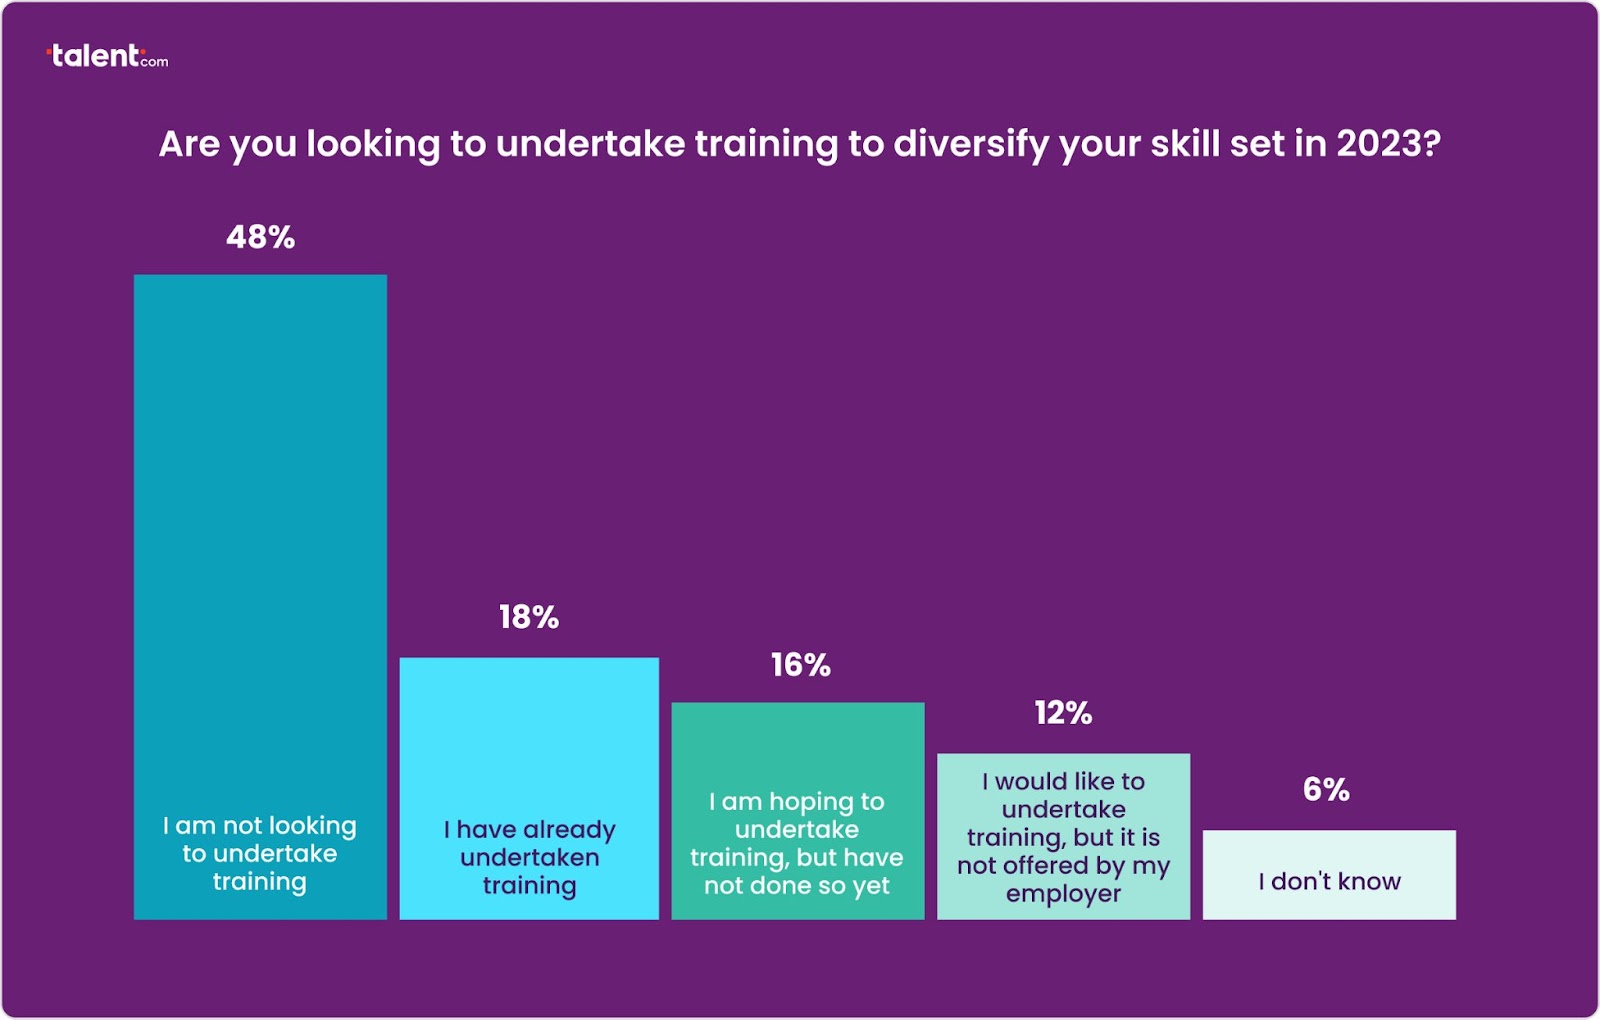 A majority of British workers is not looking to upskill